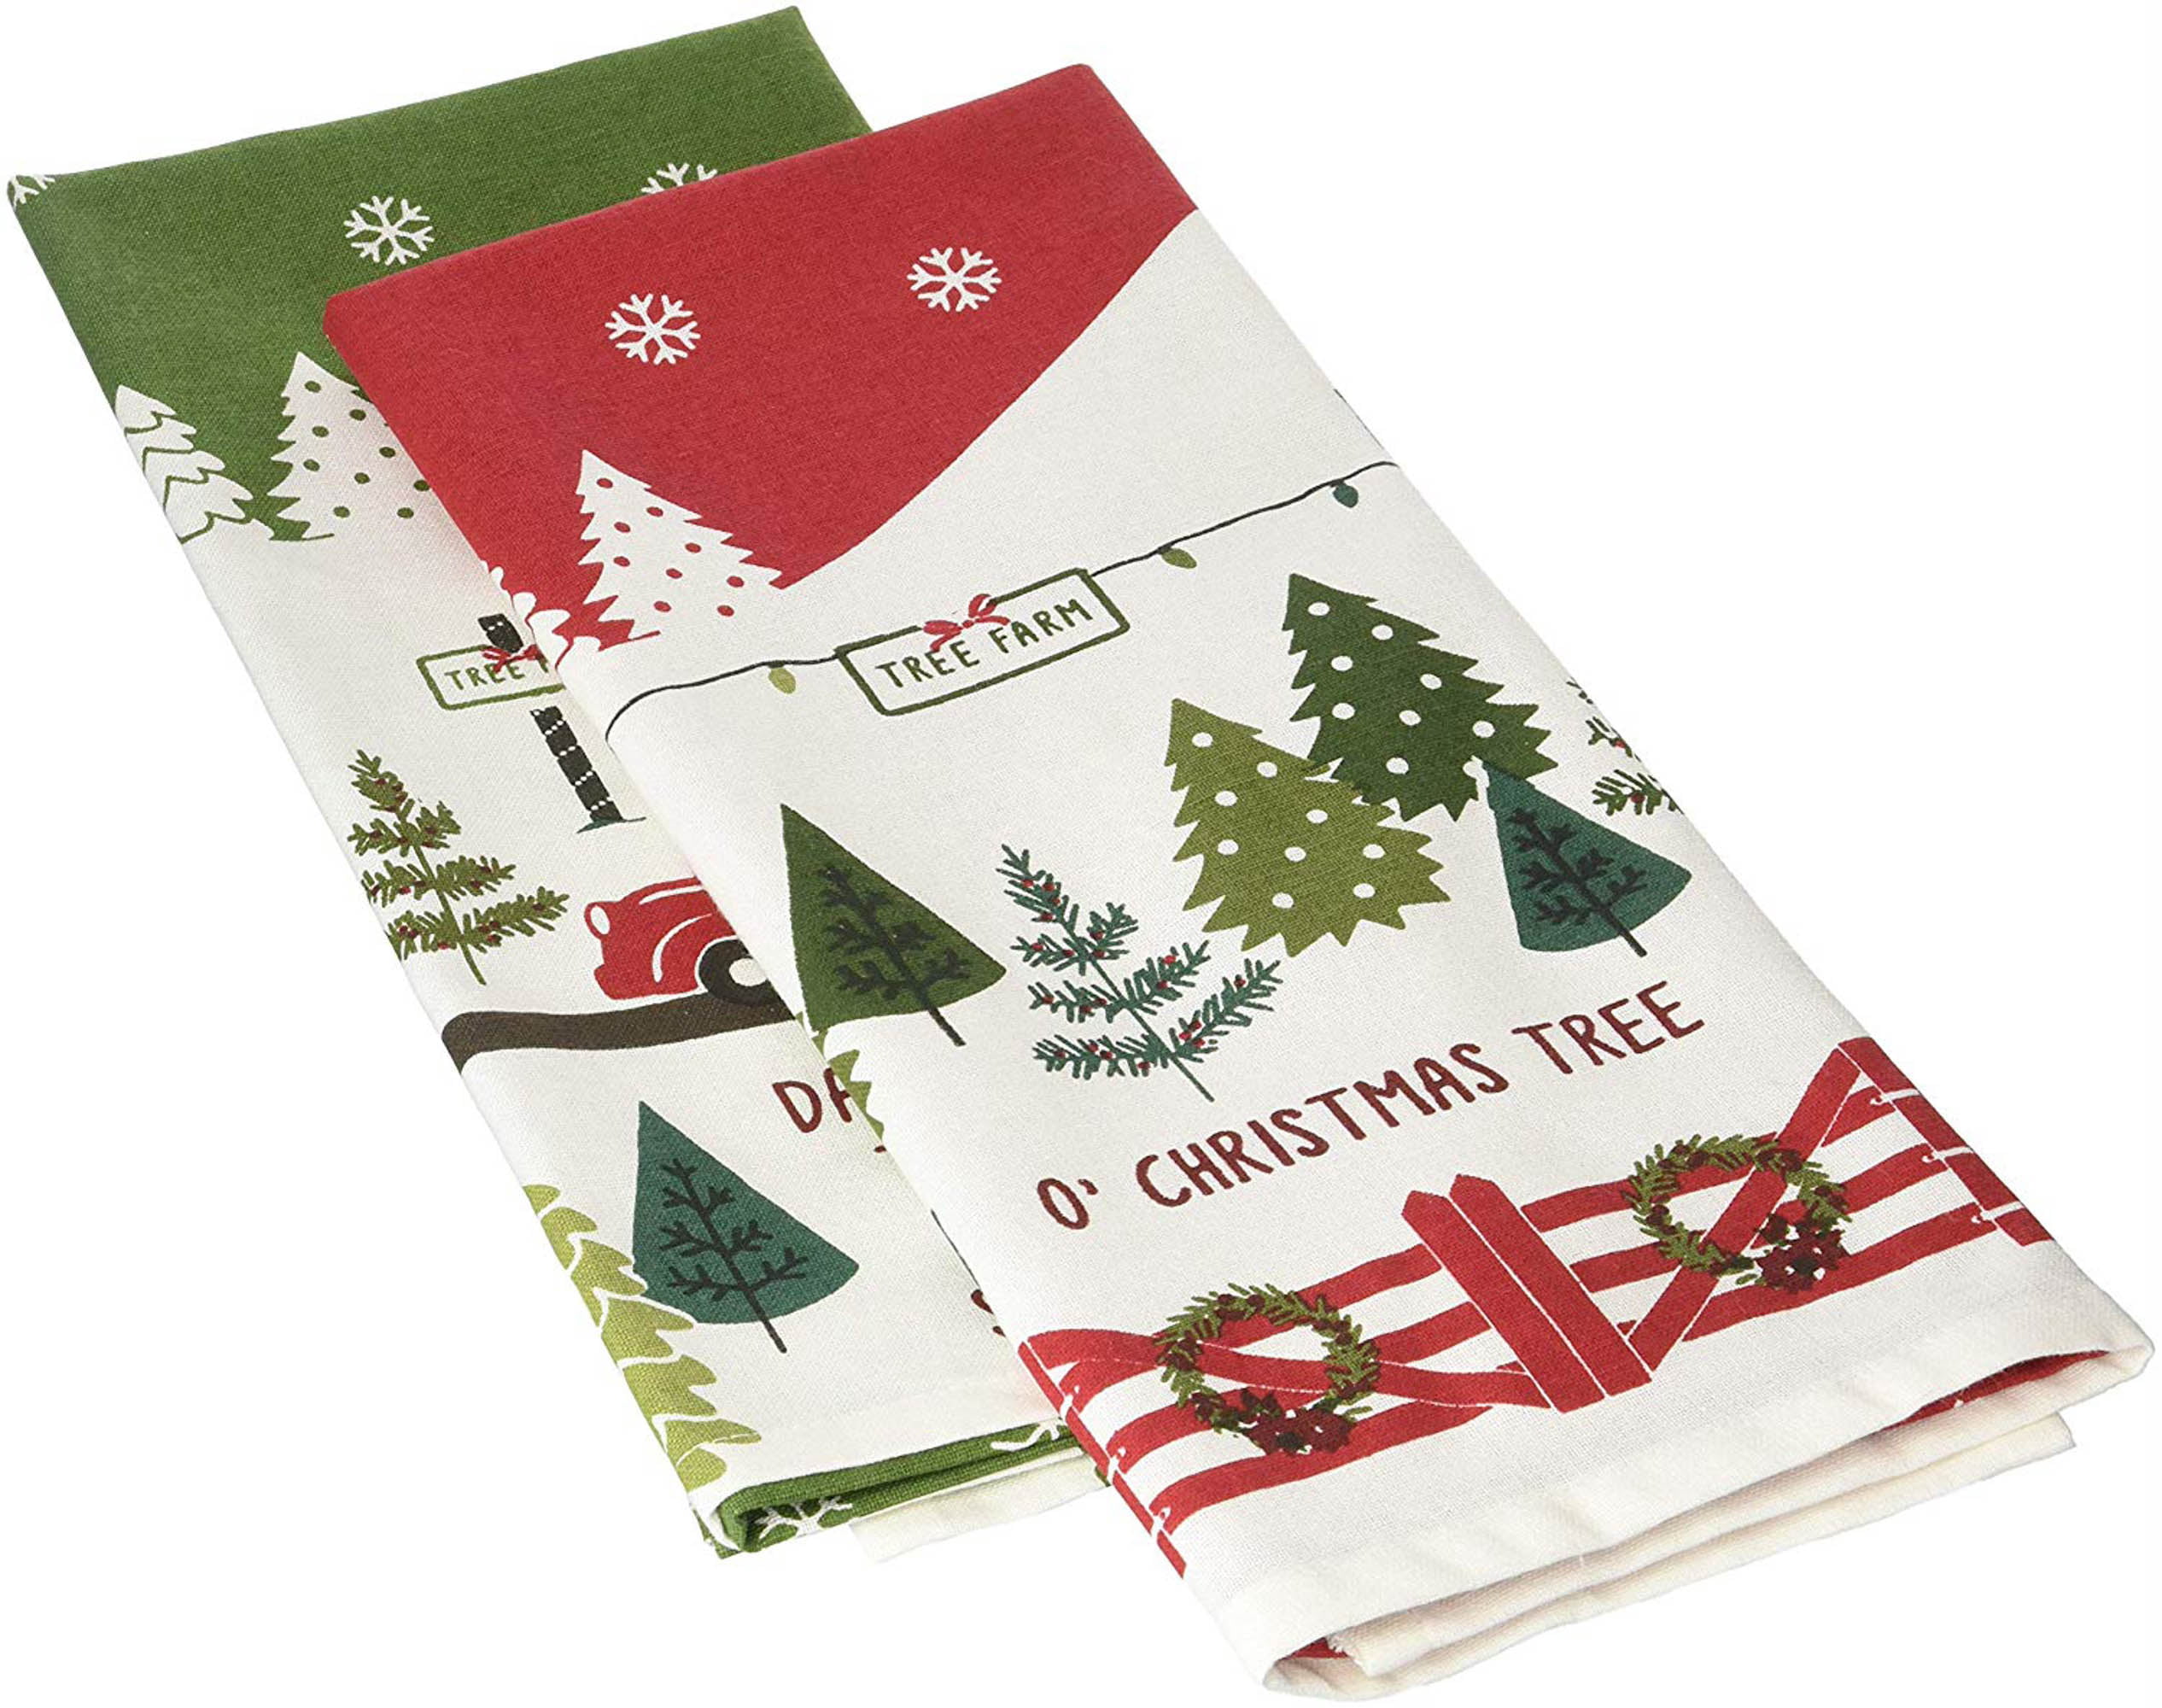 Kitchen Towel Christmas Pink Plaid Xmas Tree Dish Cloths 2 Pack  18x28in,Super Absorbent Tea Hand Towels Bathroom Cleaning Cloth Winter  Snowflake on